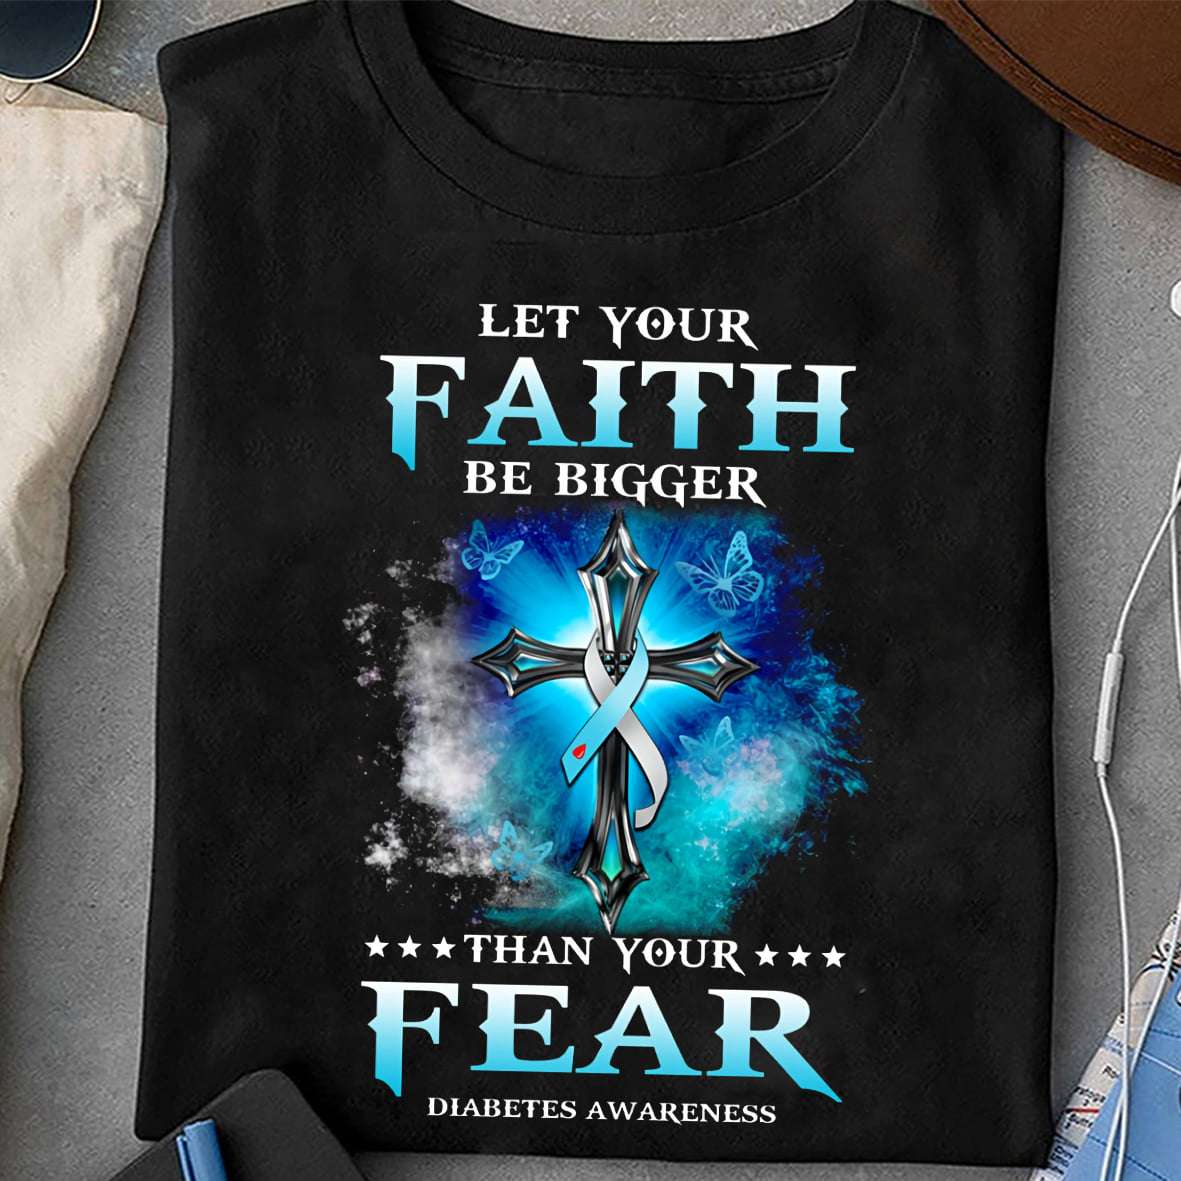 Let your faith be bigger than your fear - Diabetes awareness, Jesus's cross ribbon